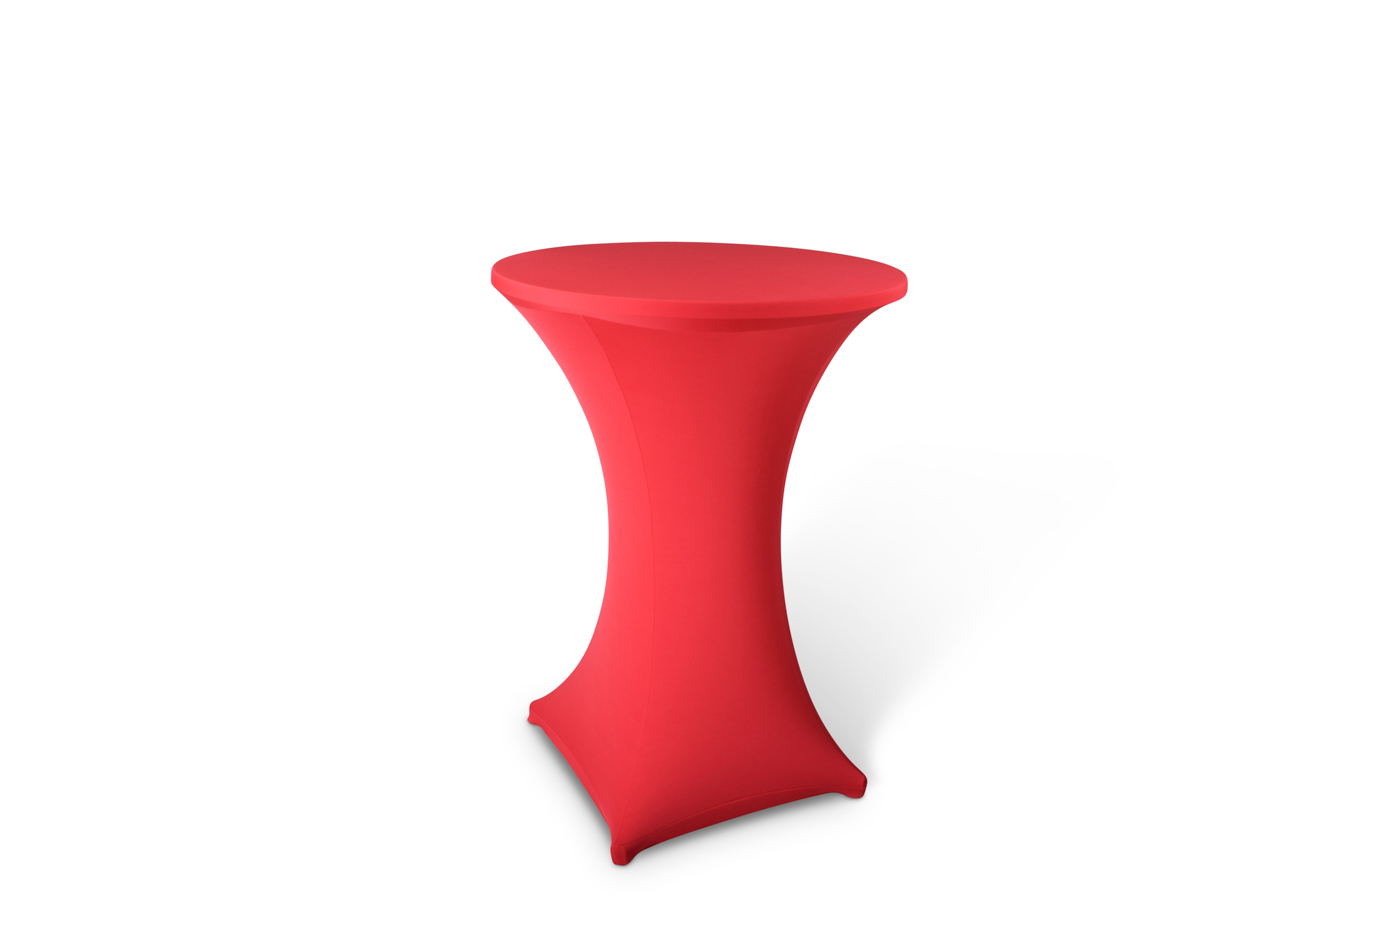 Stretch-Stehtischhusse MARS, Farbe: rot, Durchmesser: 70-75 cm, incl. Topcover, 210 g/qm, Material: 10% Elastan, 90% Polyester